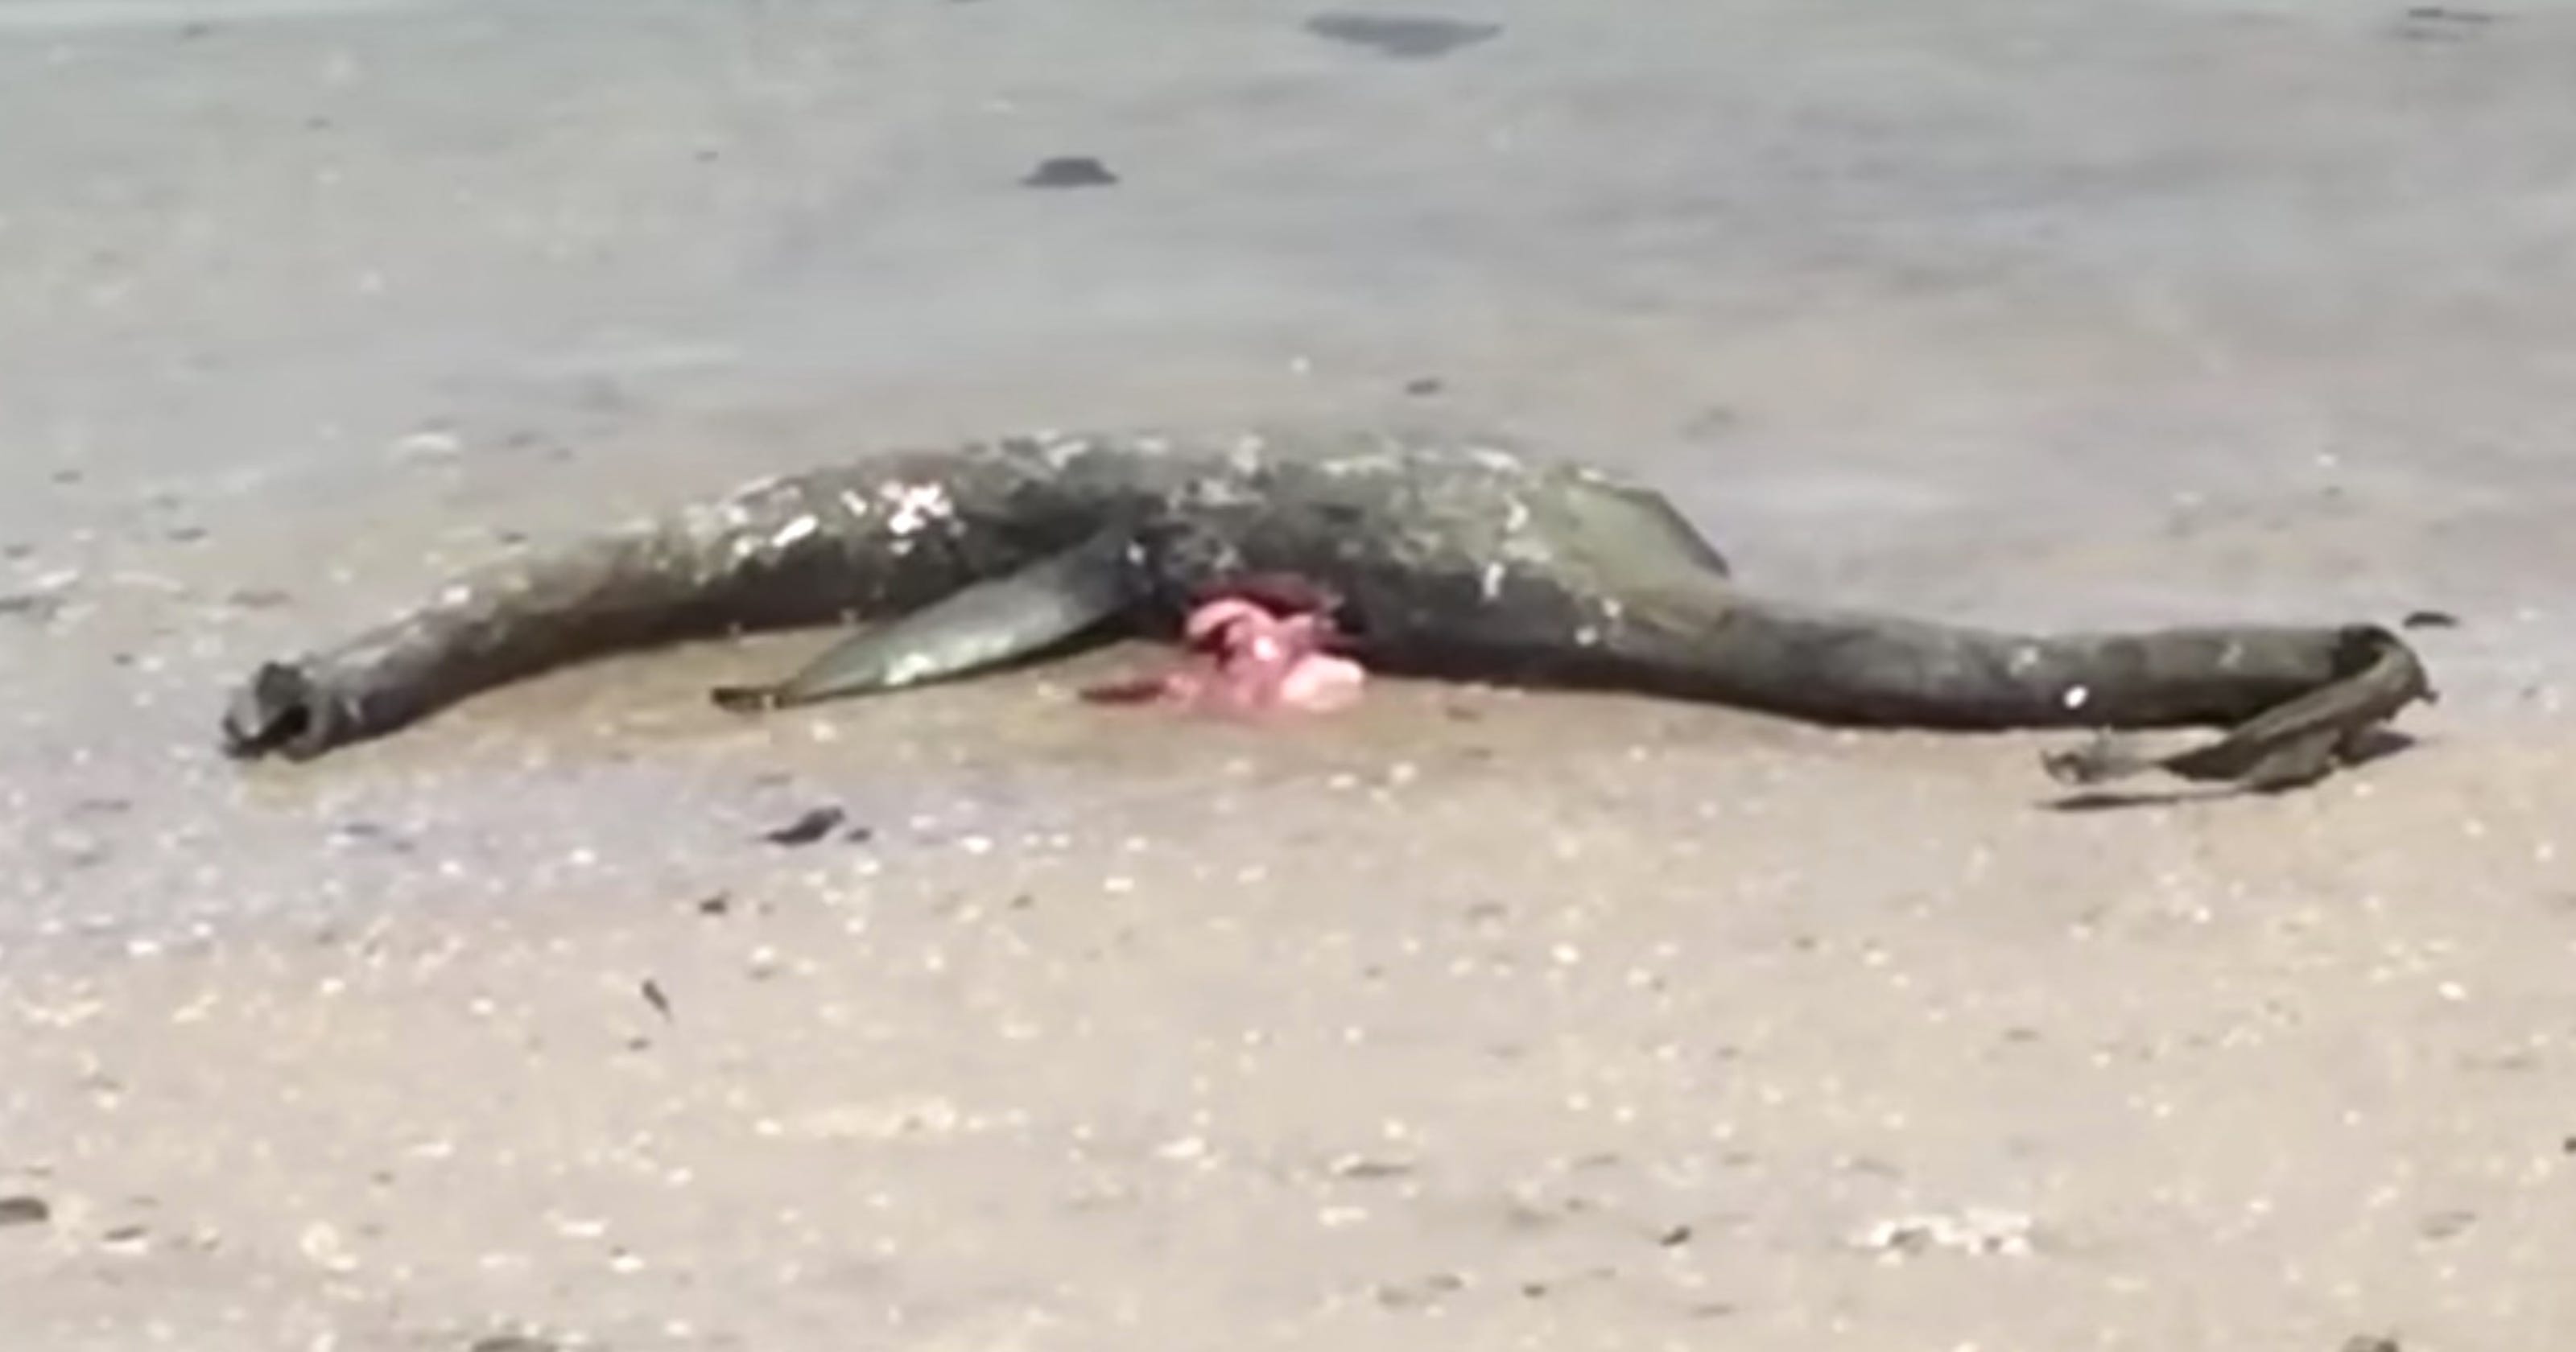 Loch Ness Monsterlike creature washes up on shore